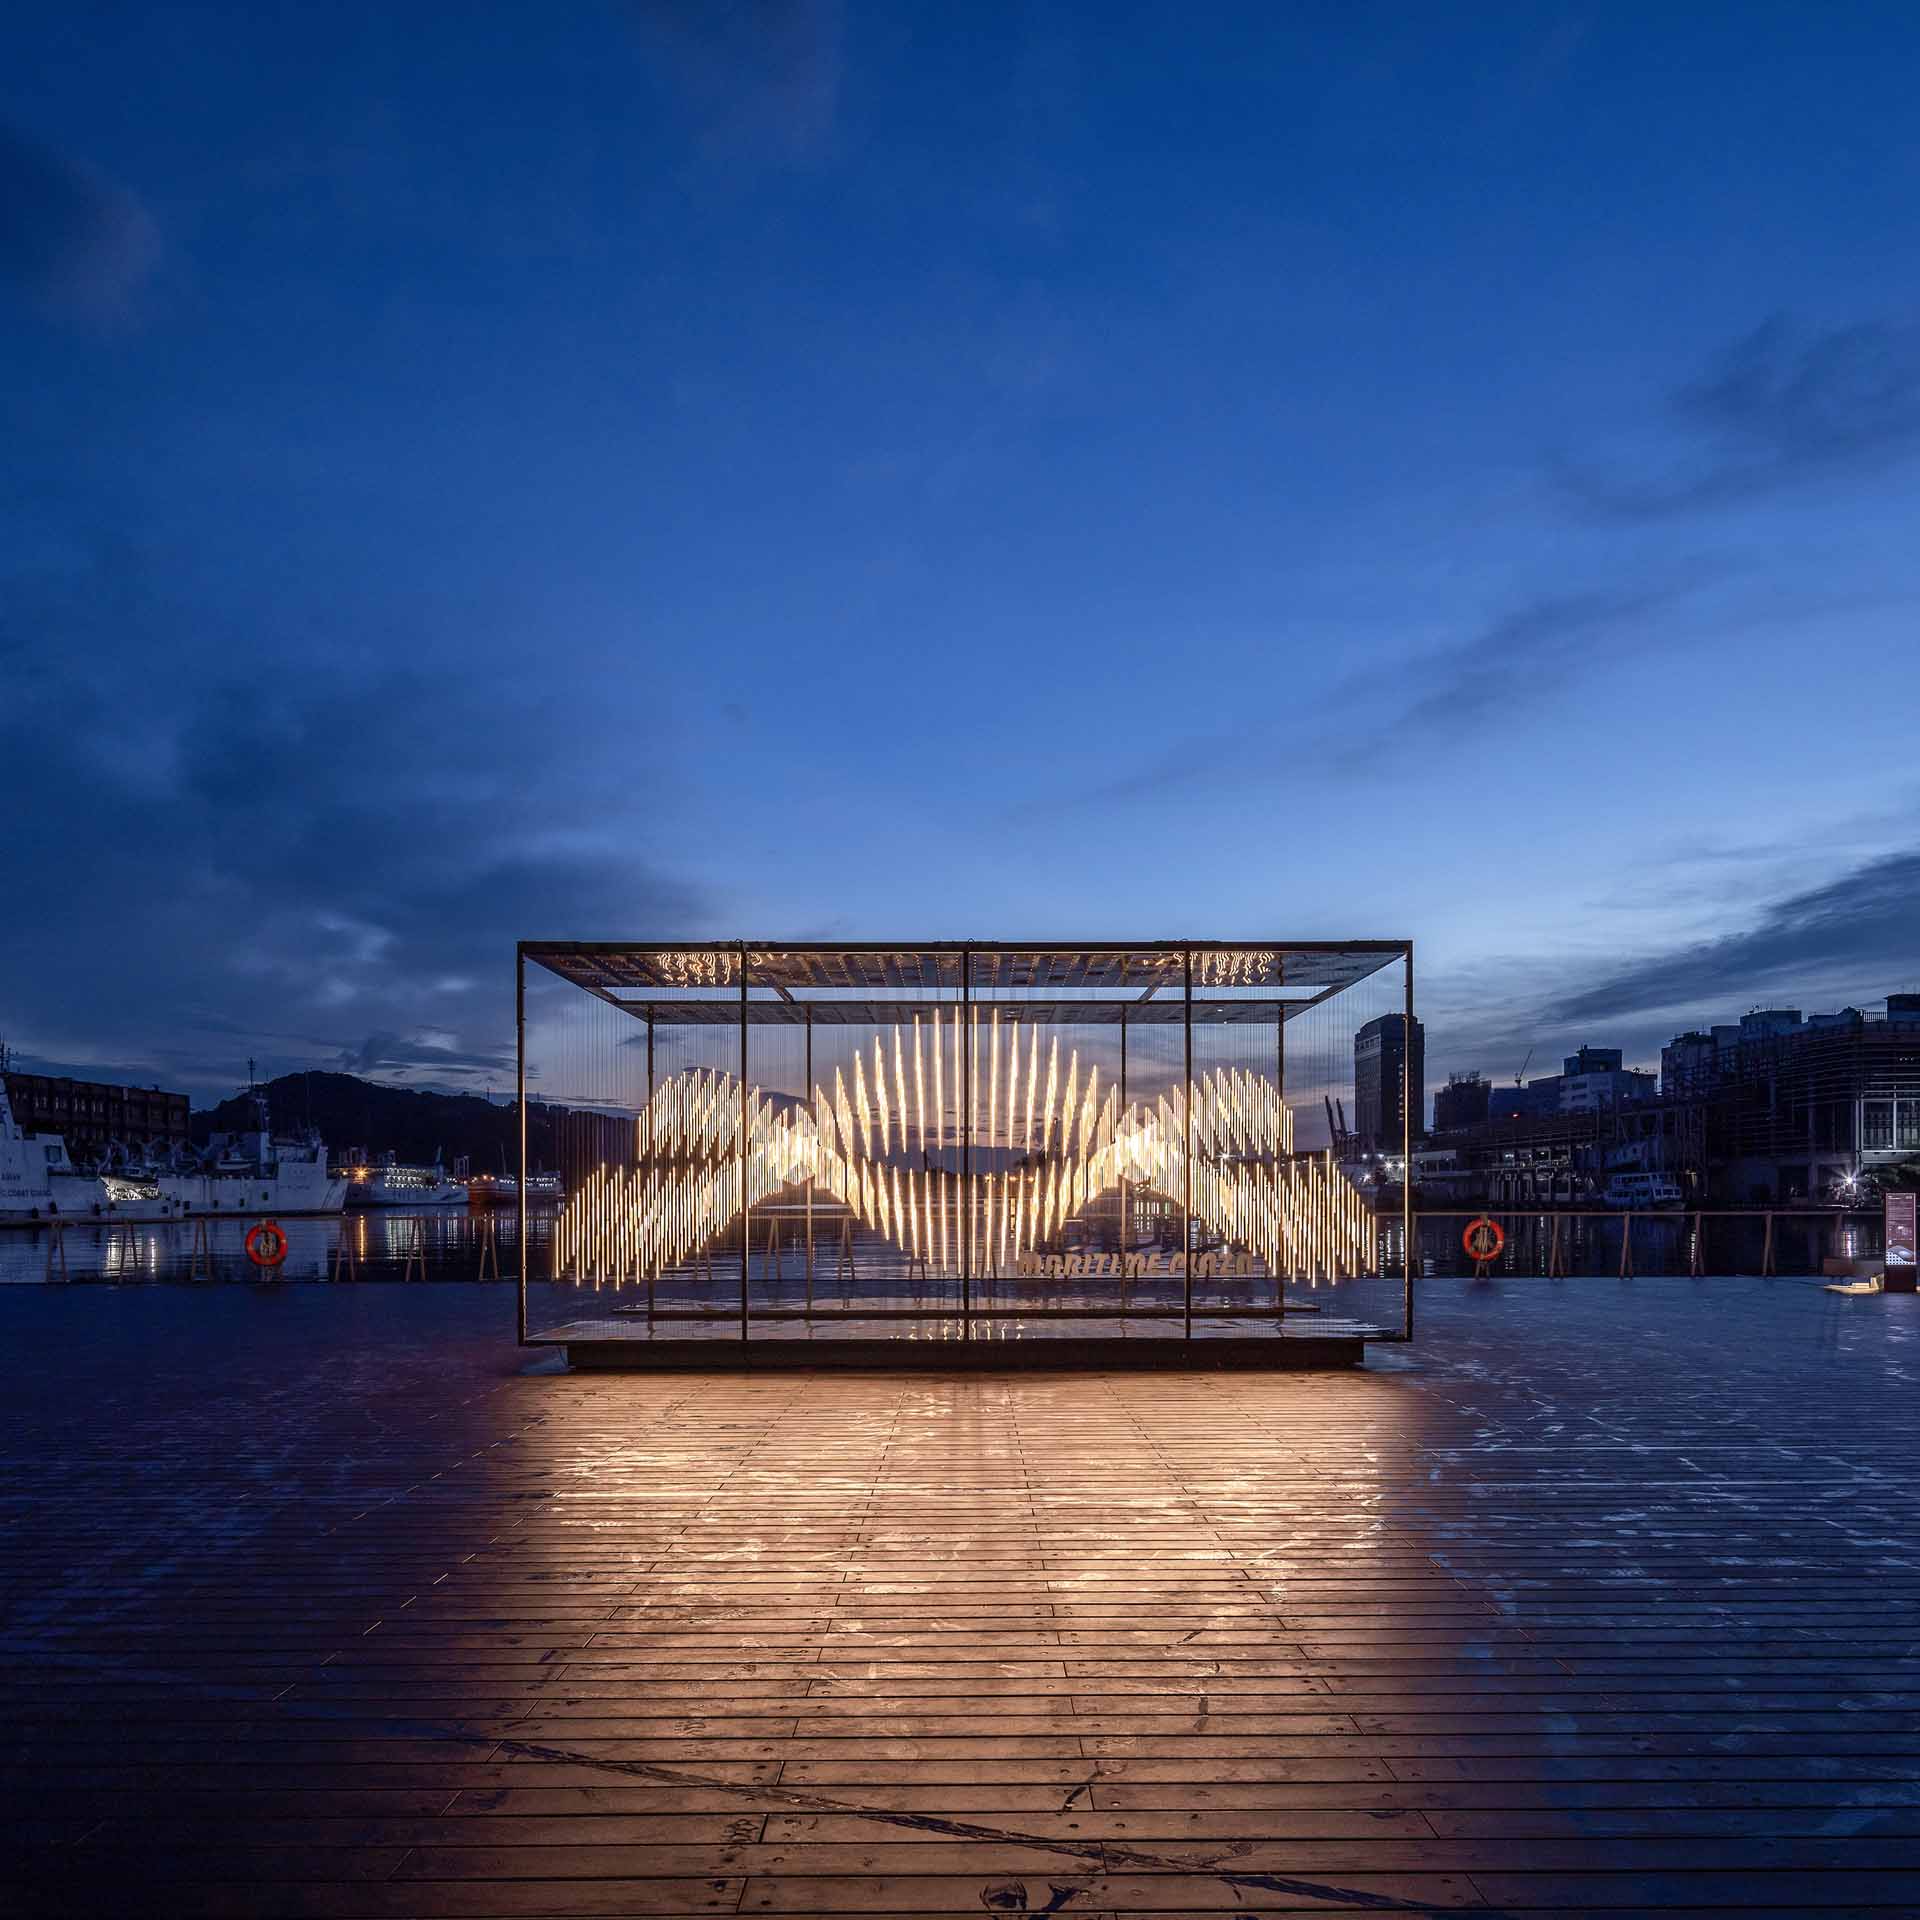 The artwork finds its inspiration in Keelung's ocean, nestled along the serene northern coast of Taiwan. The installation's lights adapt instantly to the wind's strength and direction, unveiling the subtle ،fts in the breeze.